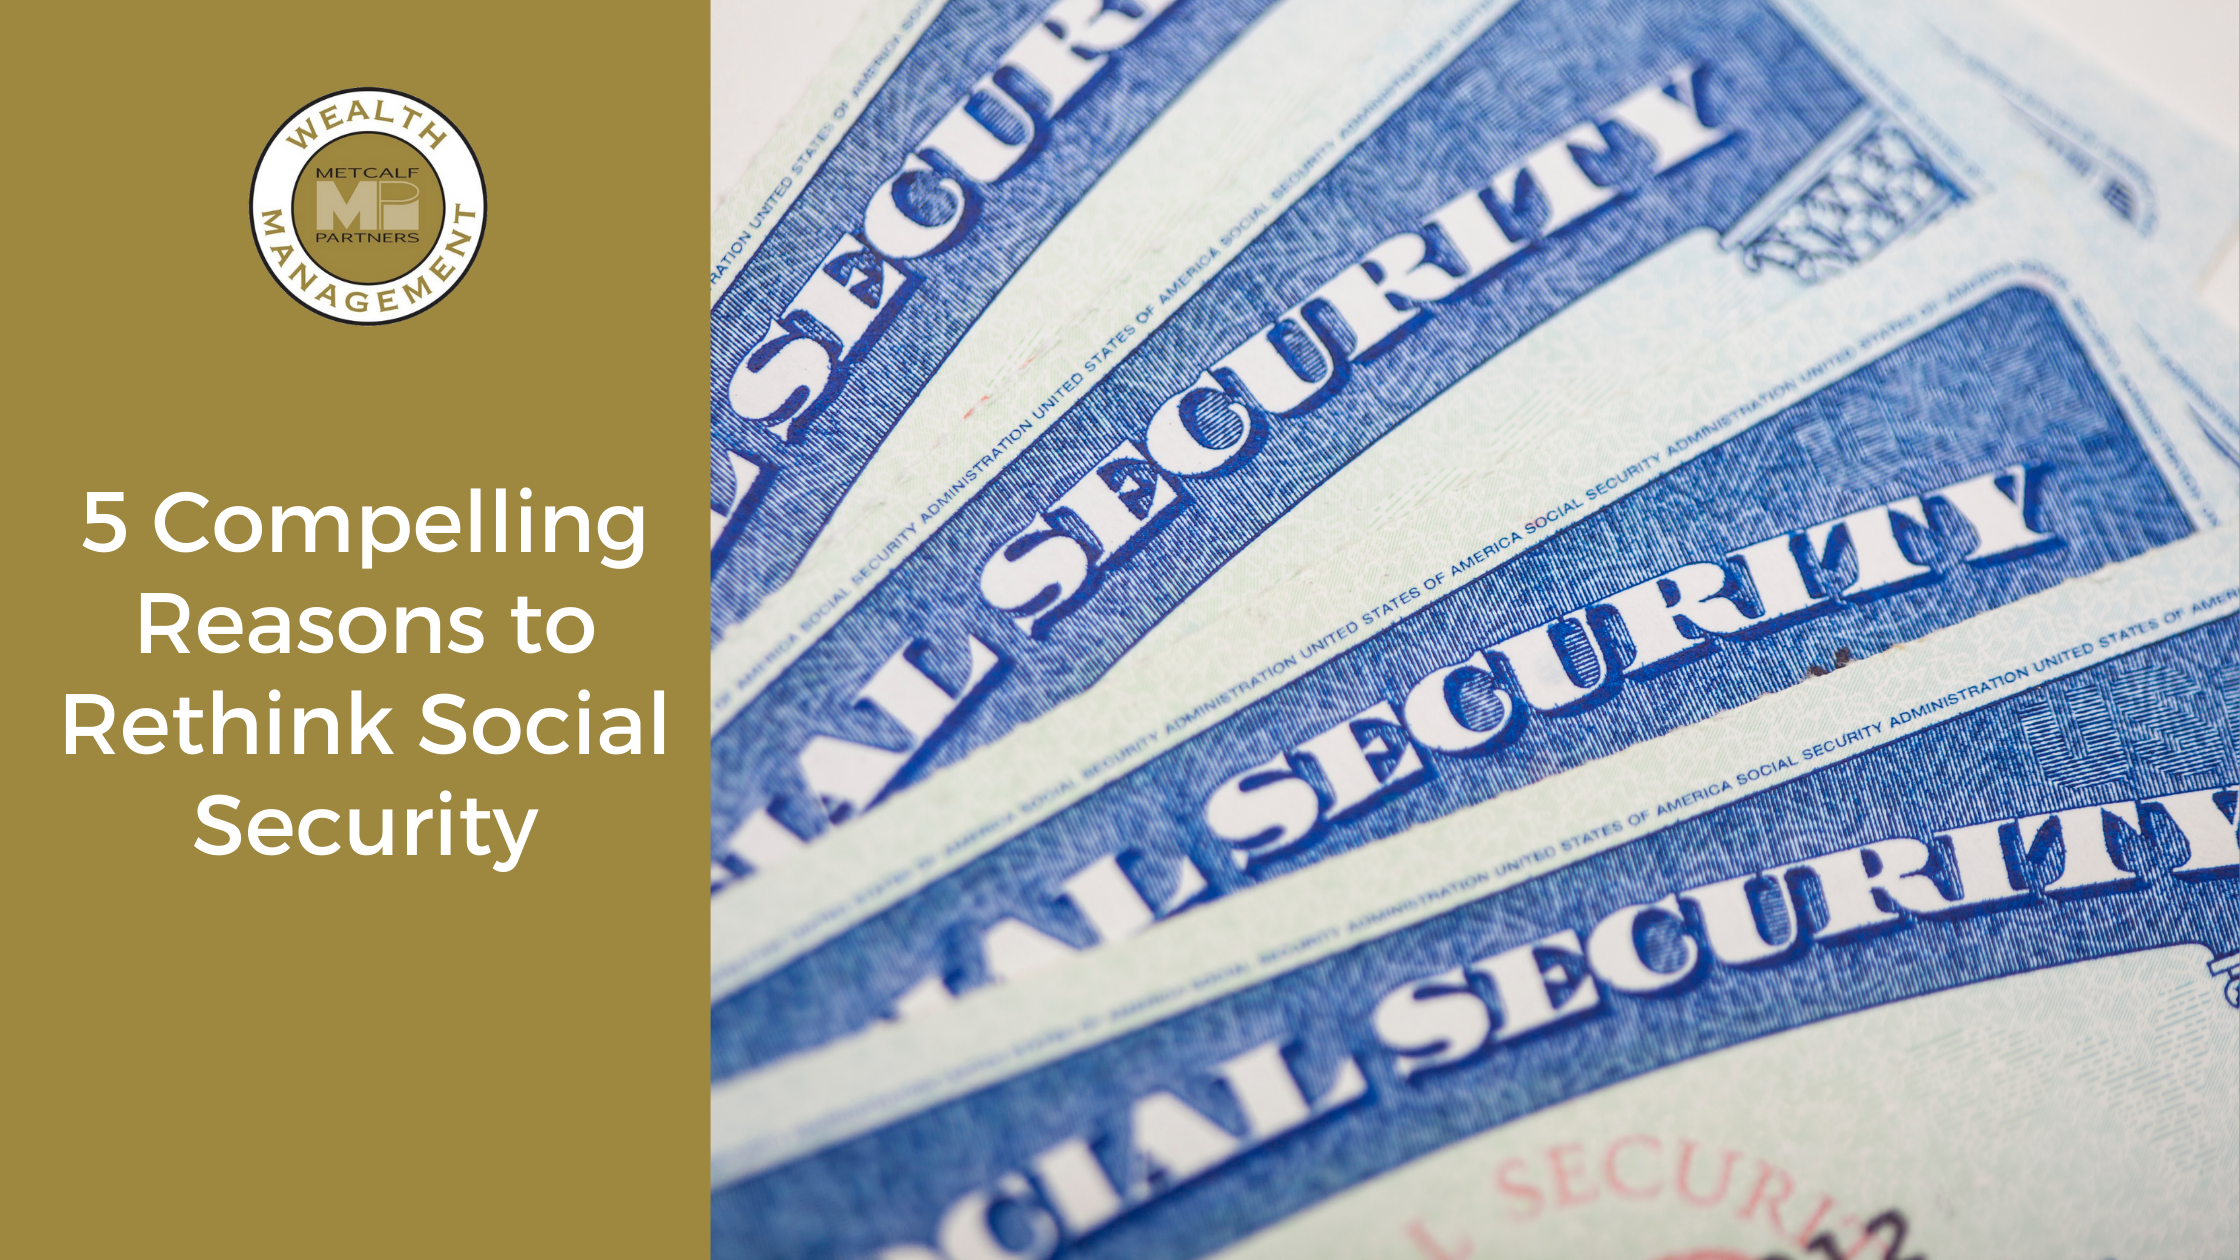 Featured image for “5 Compelling Reasons to Rethink Social Security”